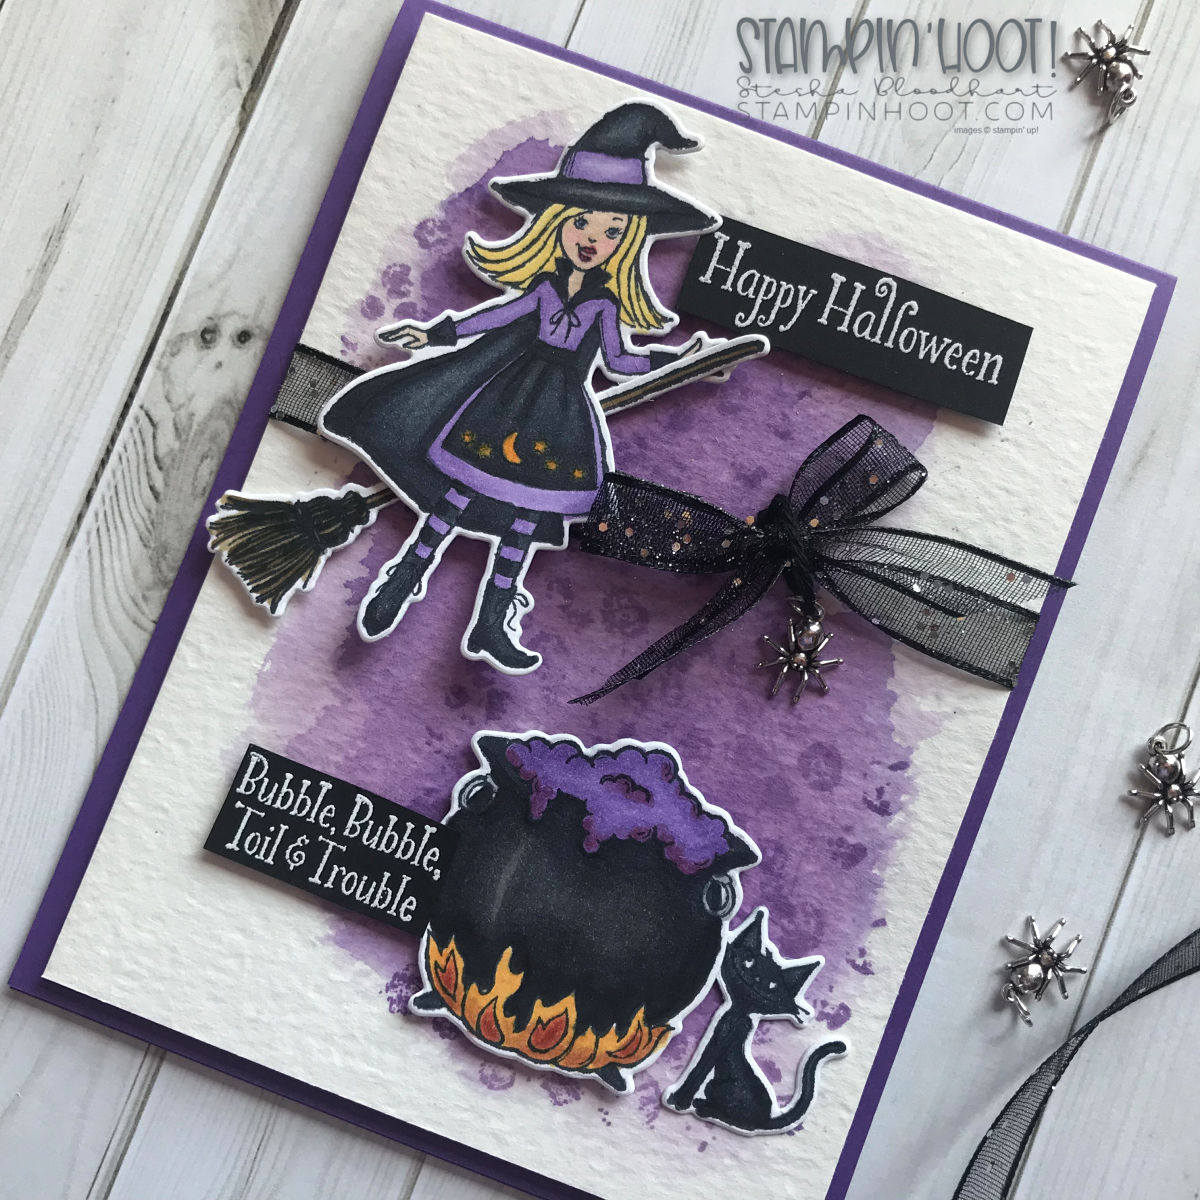 Couldron Bubble Bundle by Stampin' Up! from the 2018 Holiday Catalog. Handmade Halloween Card by Stesha Bloodhart, Stampin' Hoot! #steshabloodhart #stampinhoot